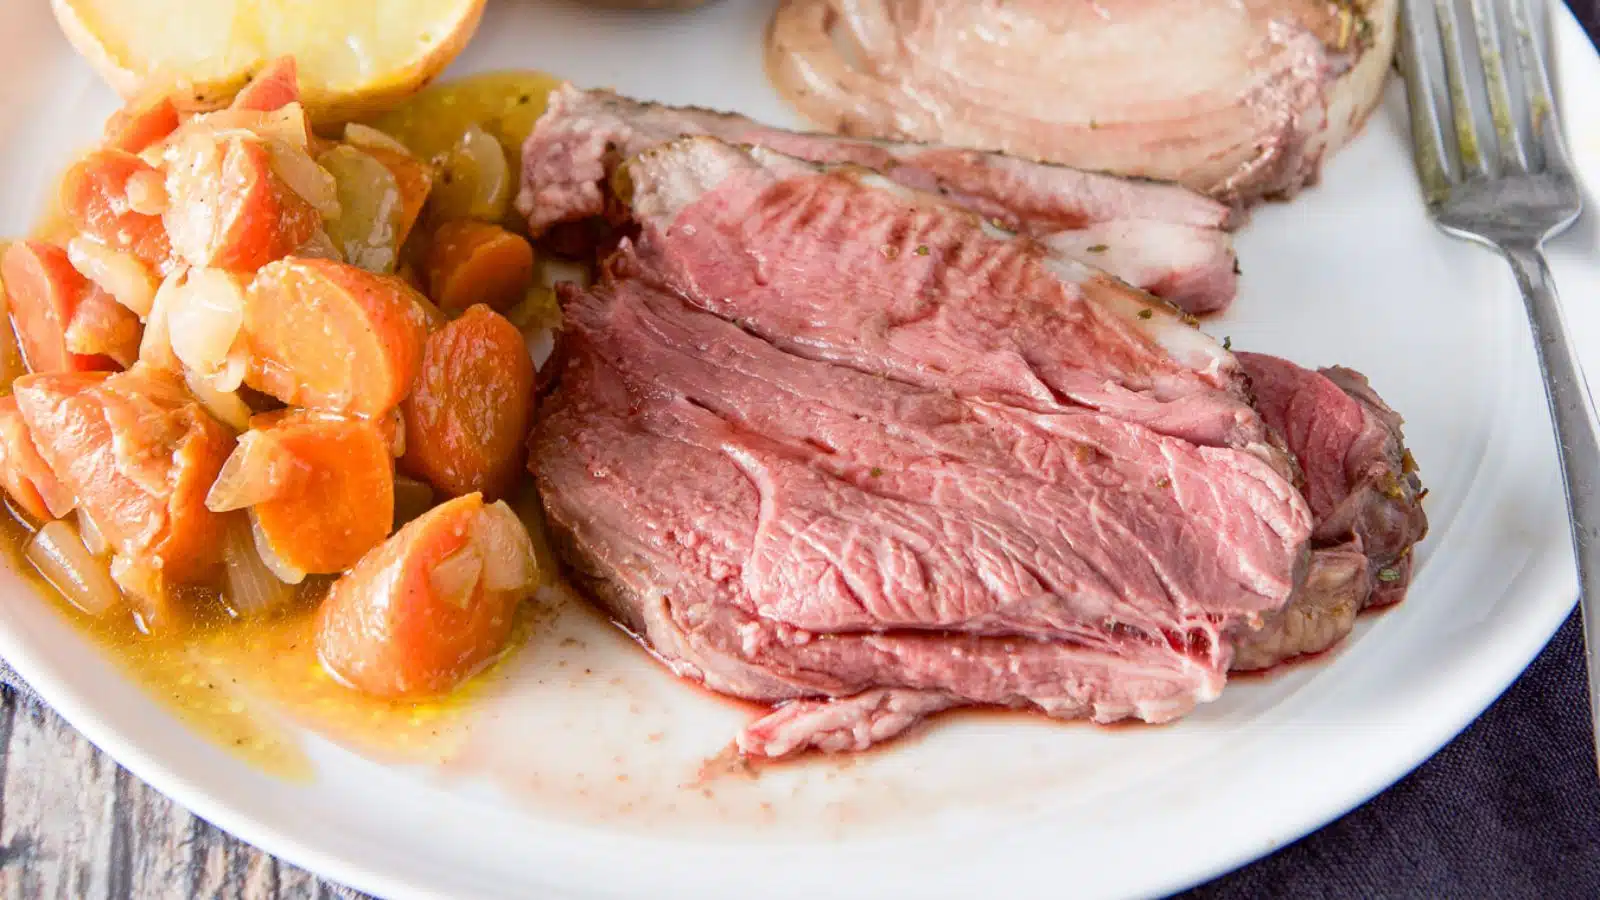 A white plate with a few pieces of lamb on it along with potato, carrots, and onion